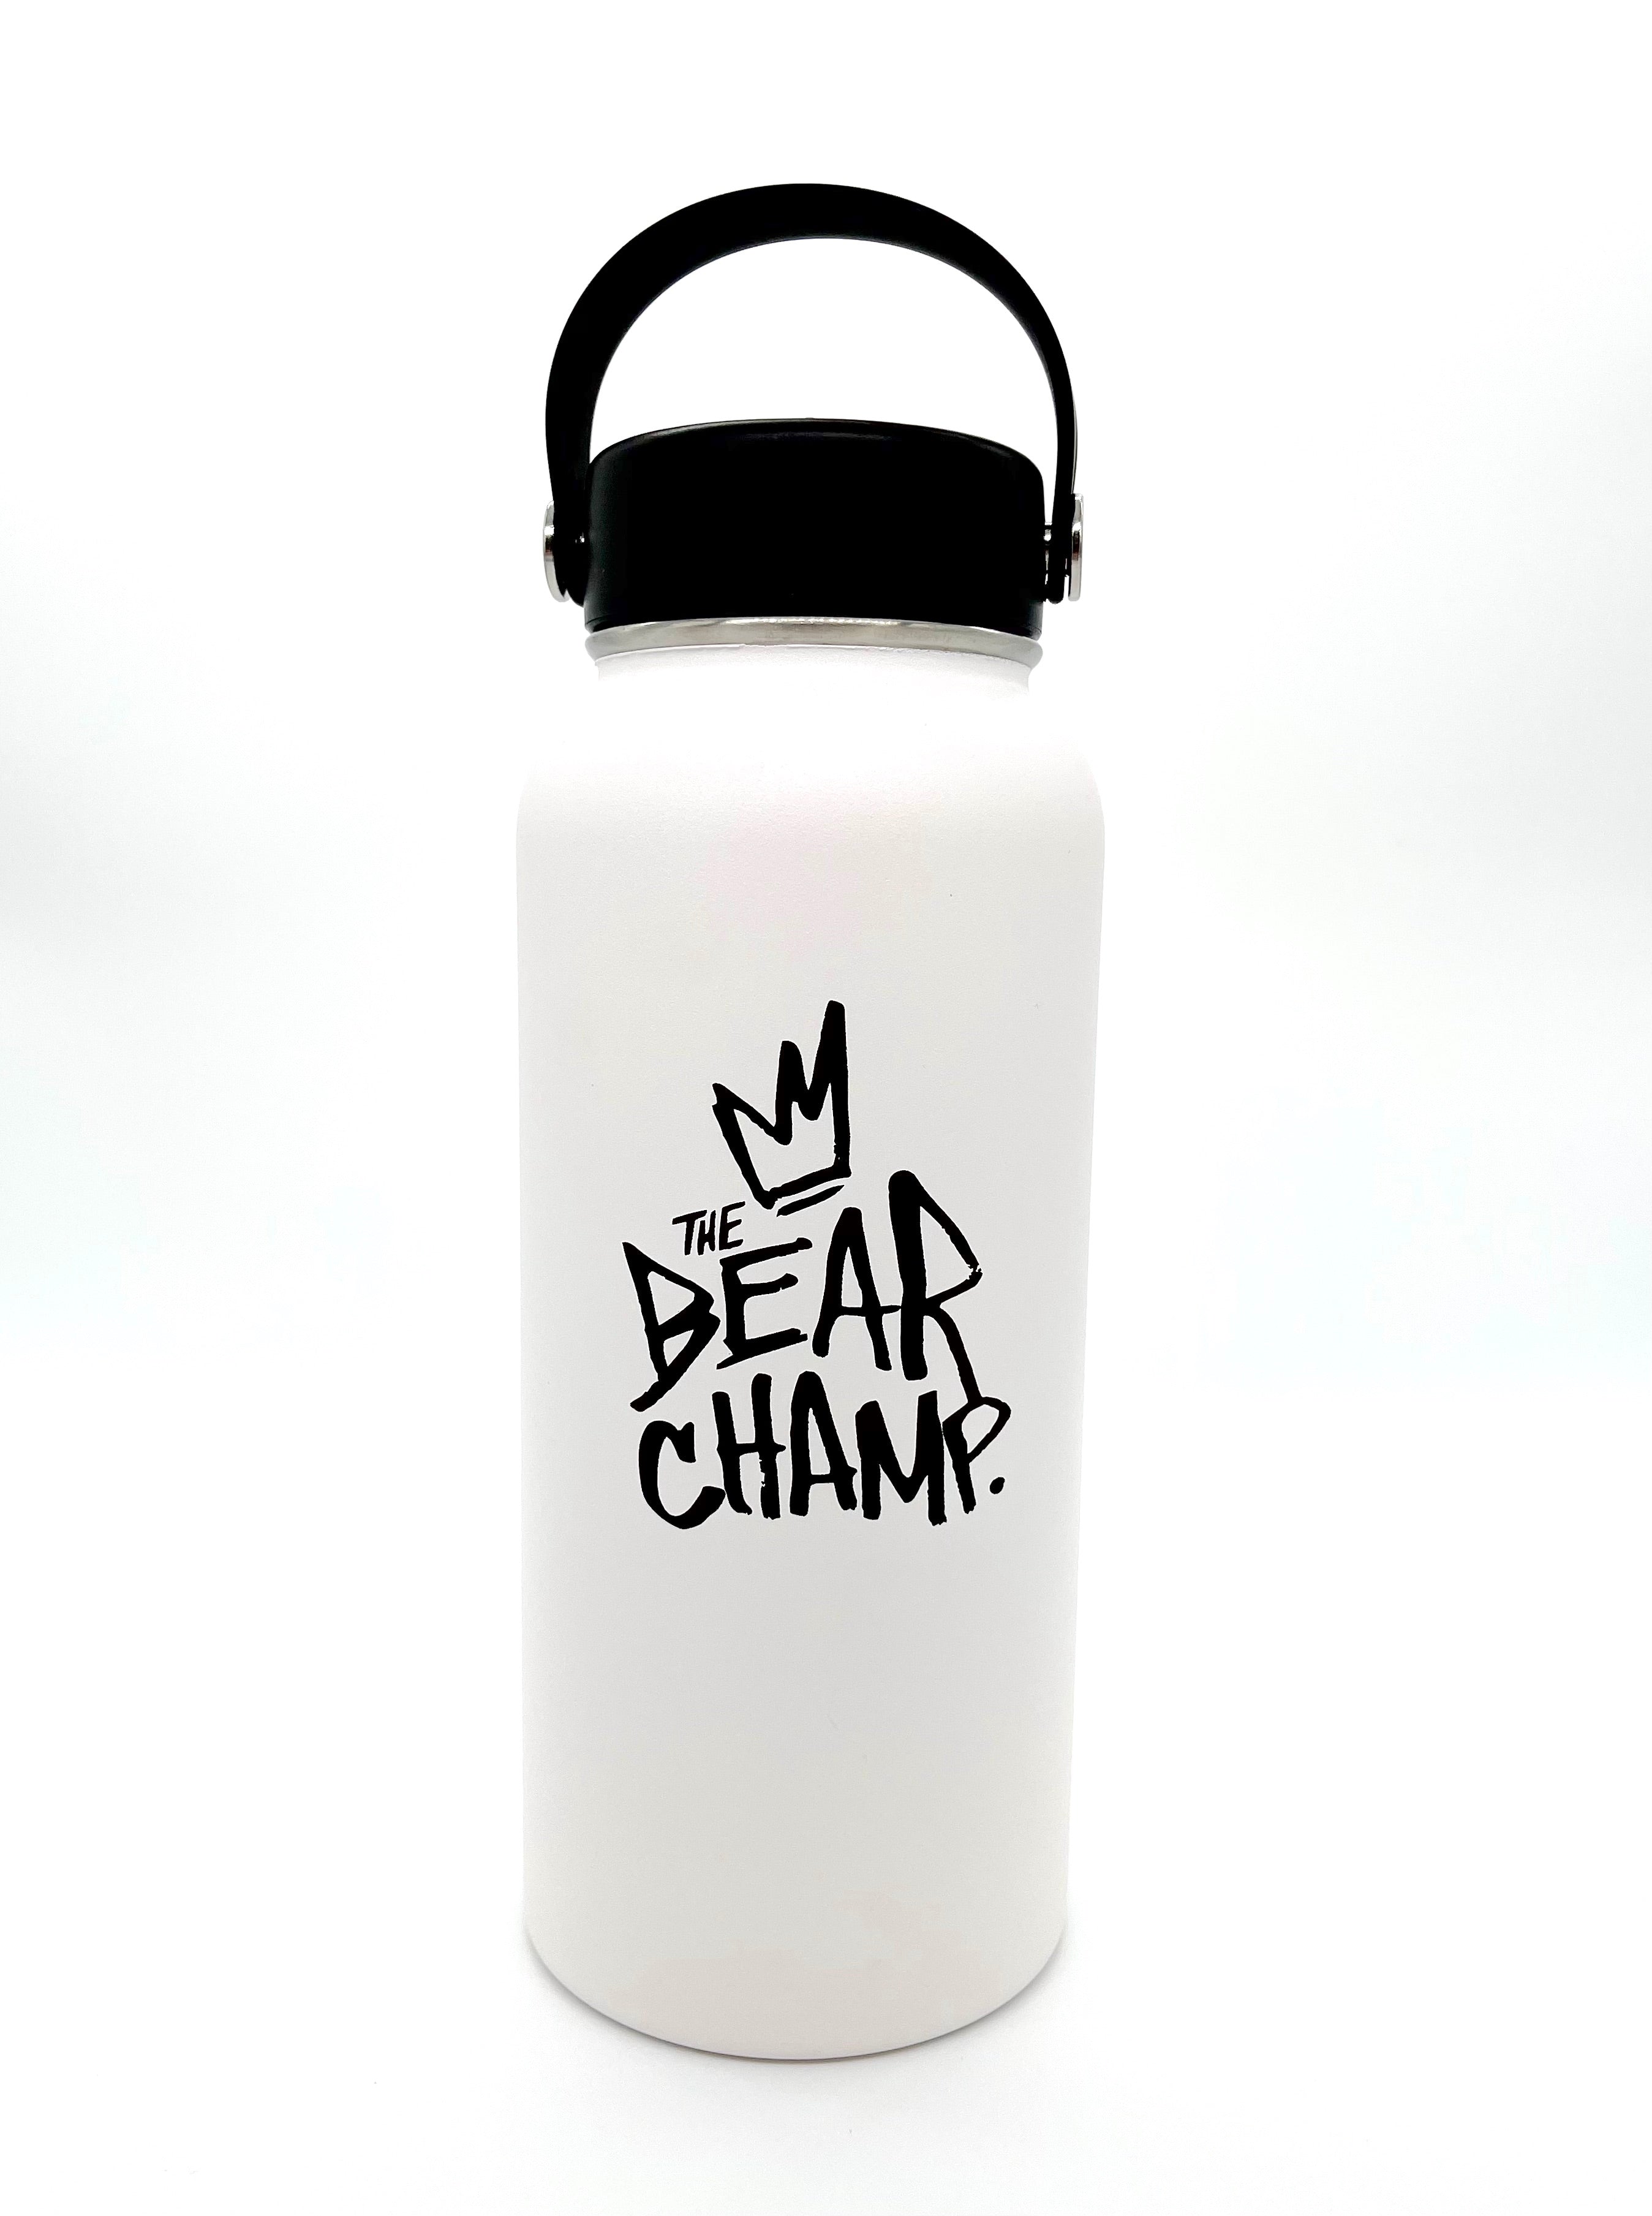 The Bear Champ Stainless Steel Water Bottle by JC Rivera